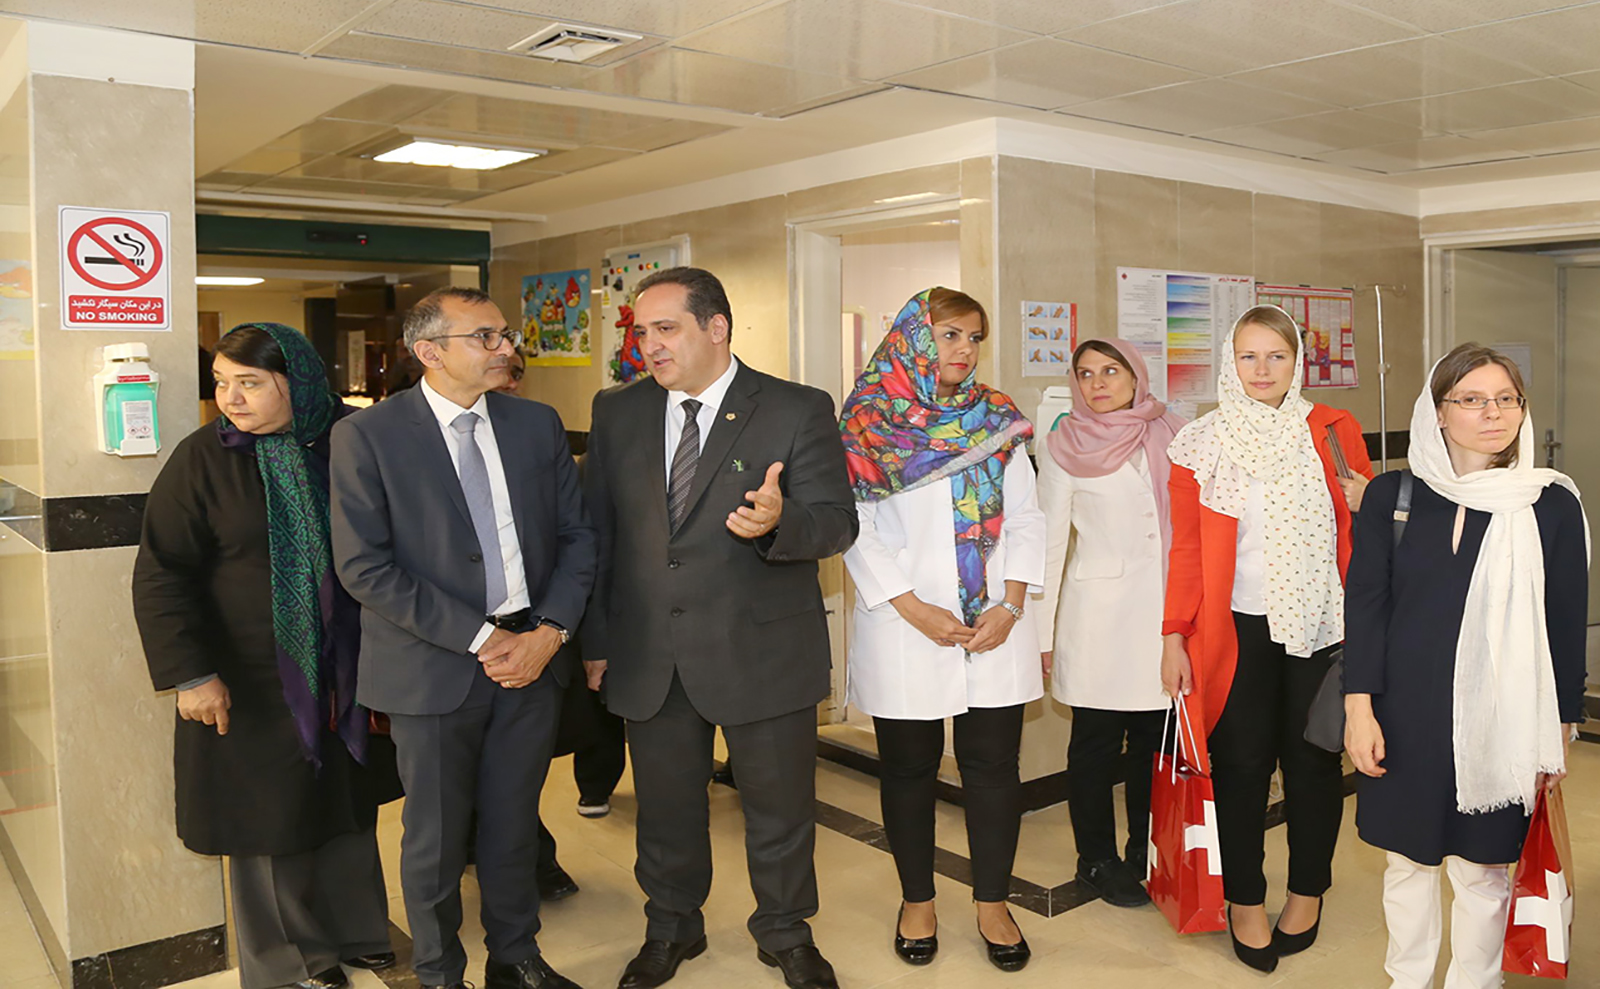 The visit of the Swiss ambassador and the representative of the Ministry of Health in June 2018